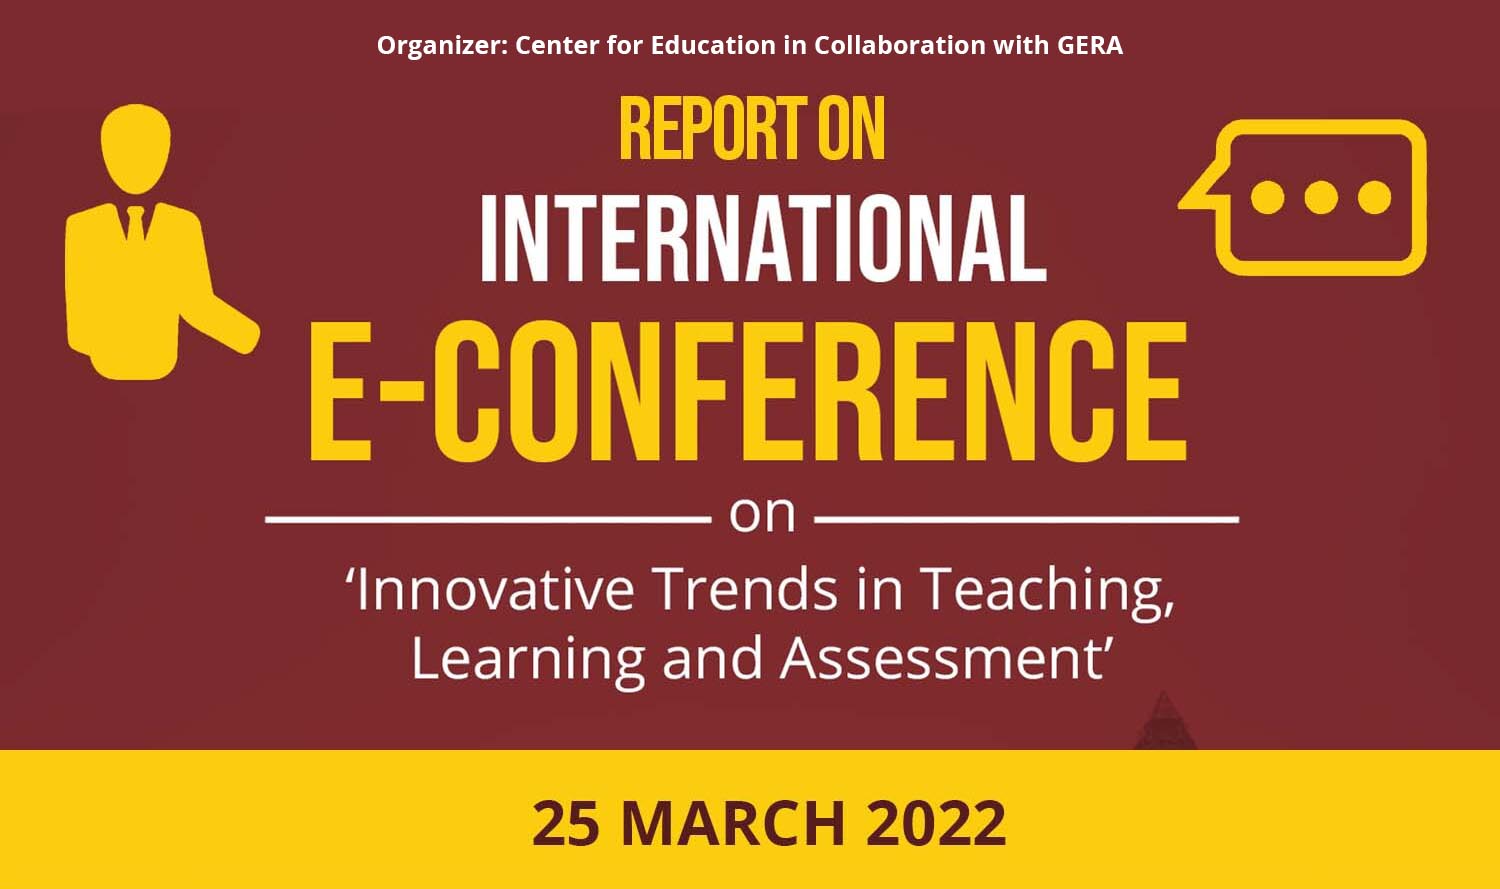 International-E-Conference-on-Innovative-Trends-in-Teaching-Learning-and-Assessment